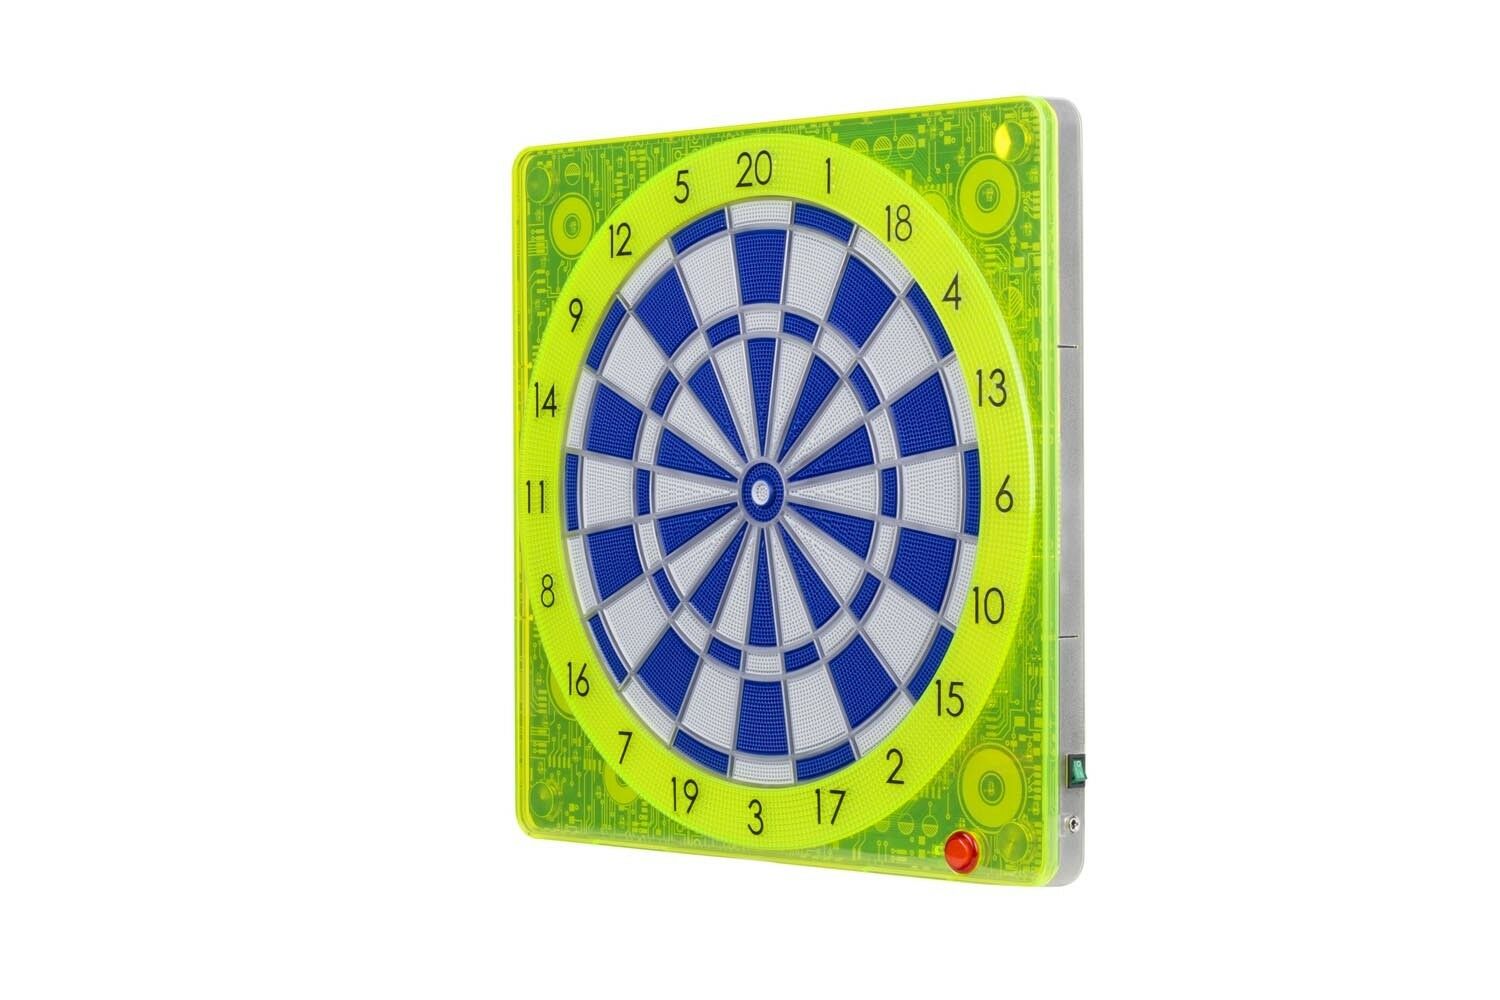 Smartness Online Connect DARTBOARD SQUARE-501, Yellow per Guz App auf IOS Android Dart Spielzeug and Baby myHobby24.de AG